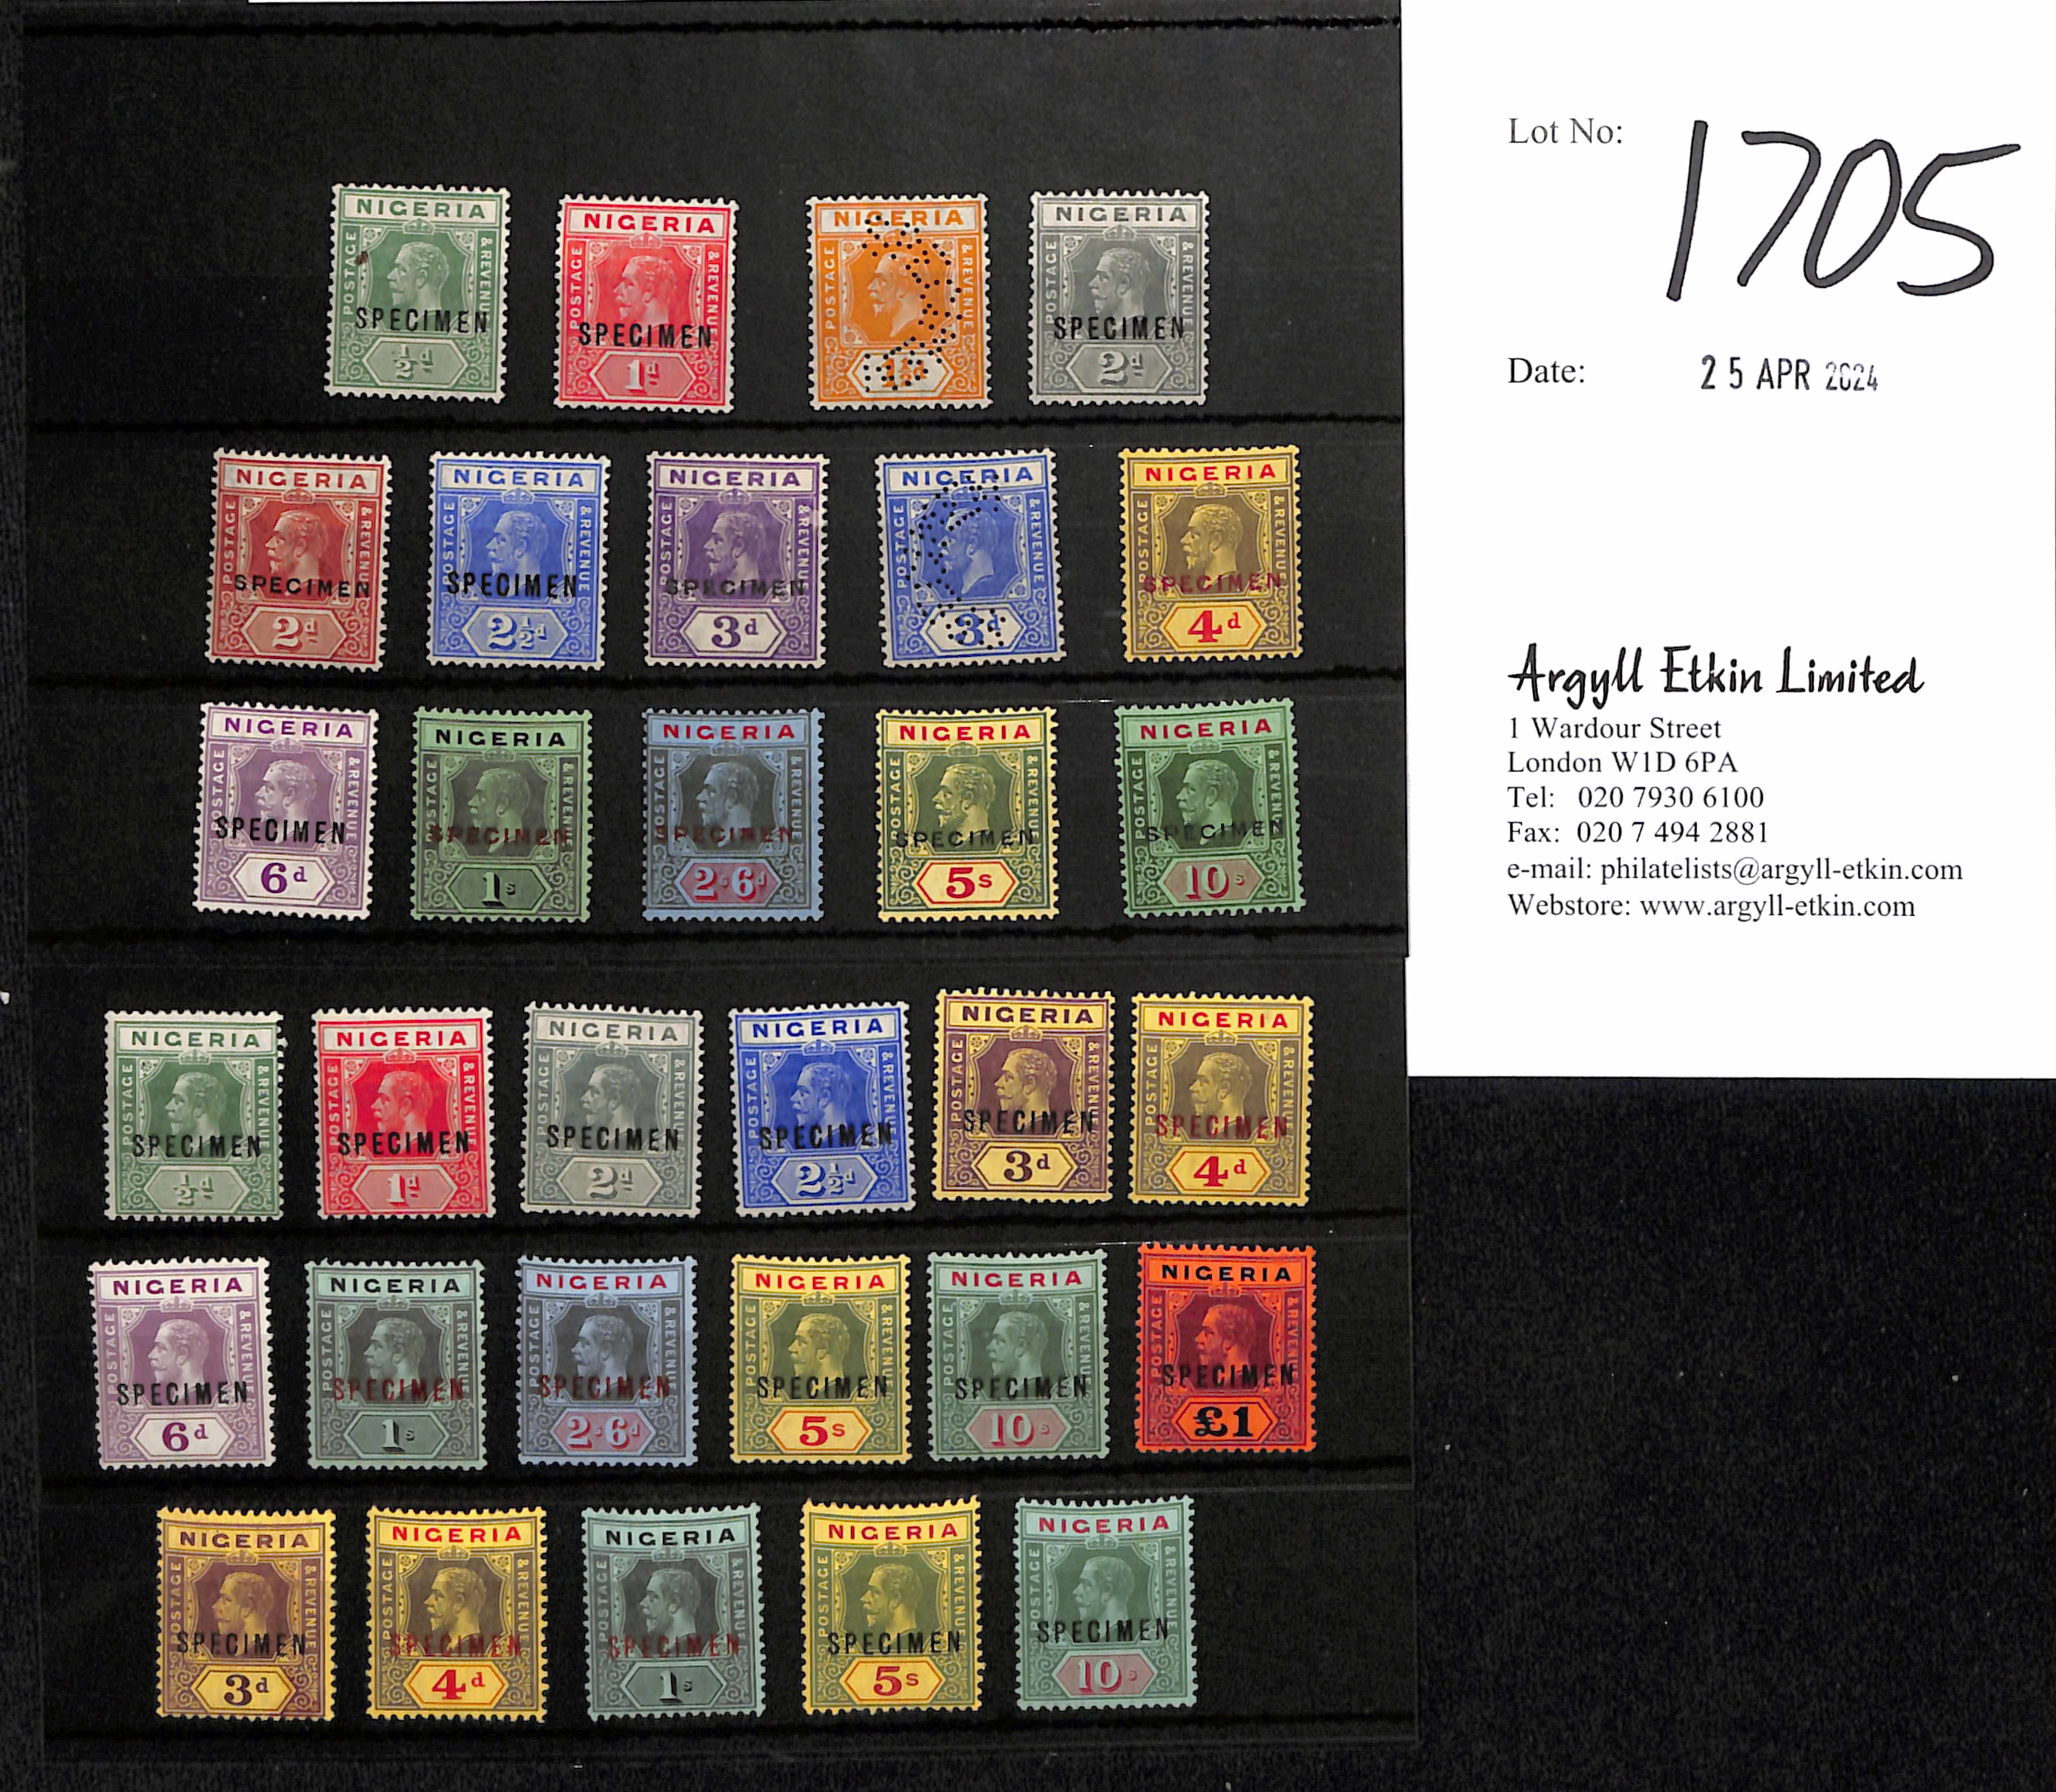 1914-32 Specimen sets complete, the 1914-29 ½d - £1 set of twelve with both white and coloured